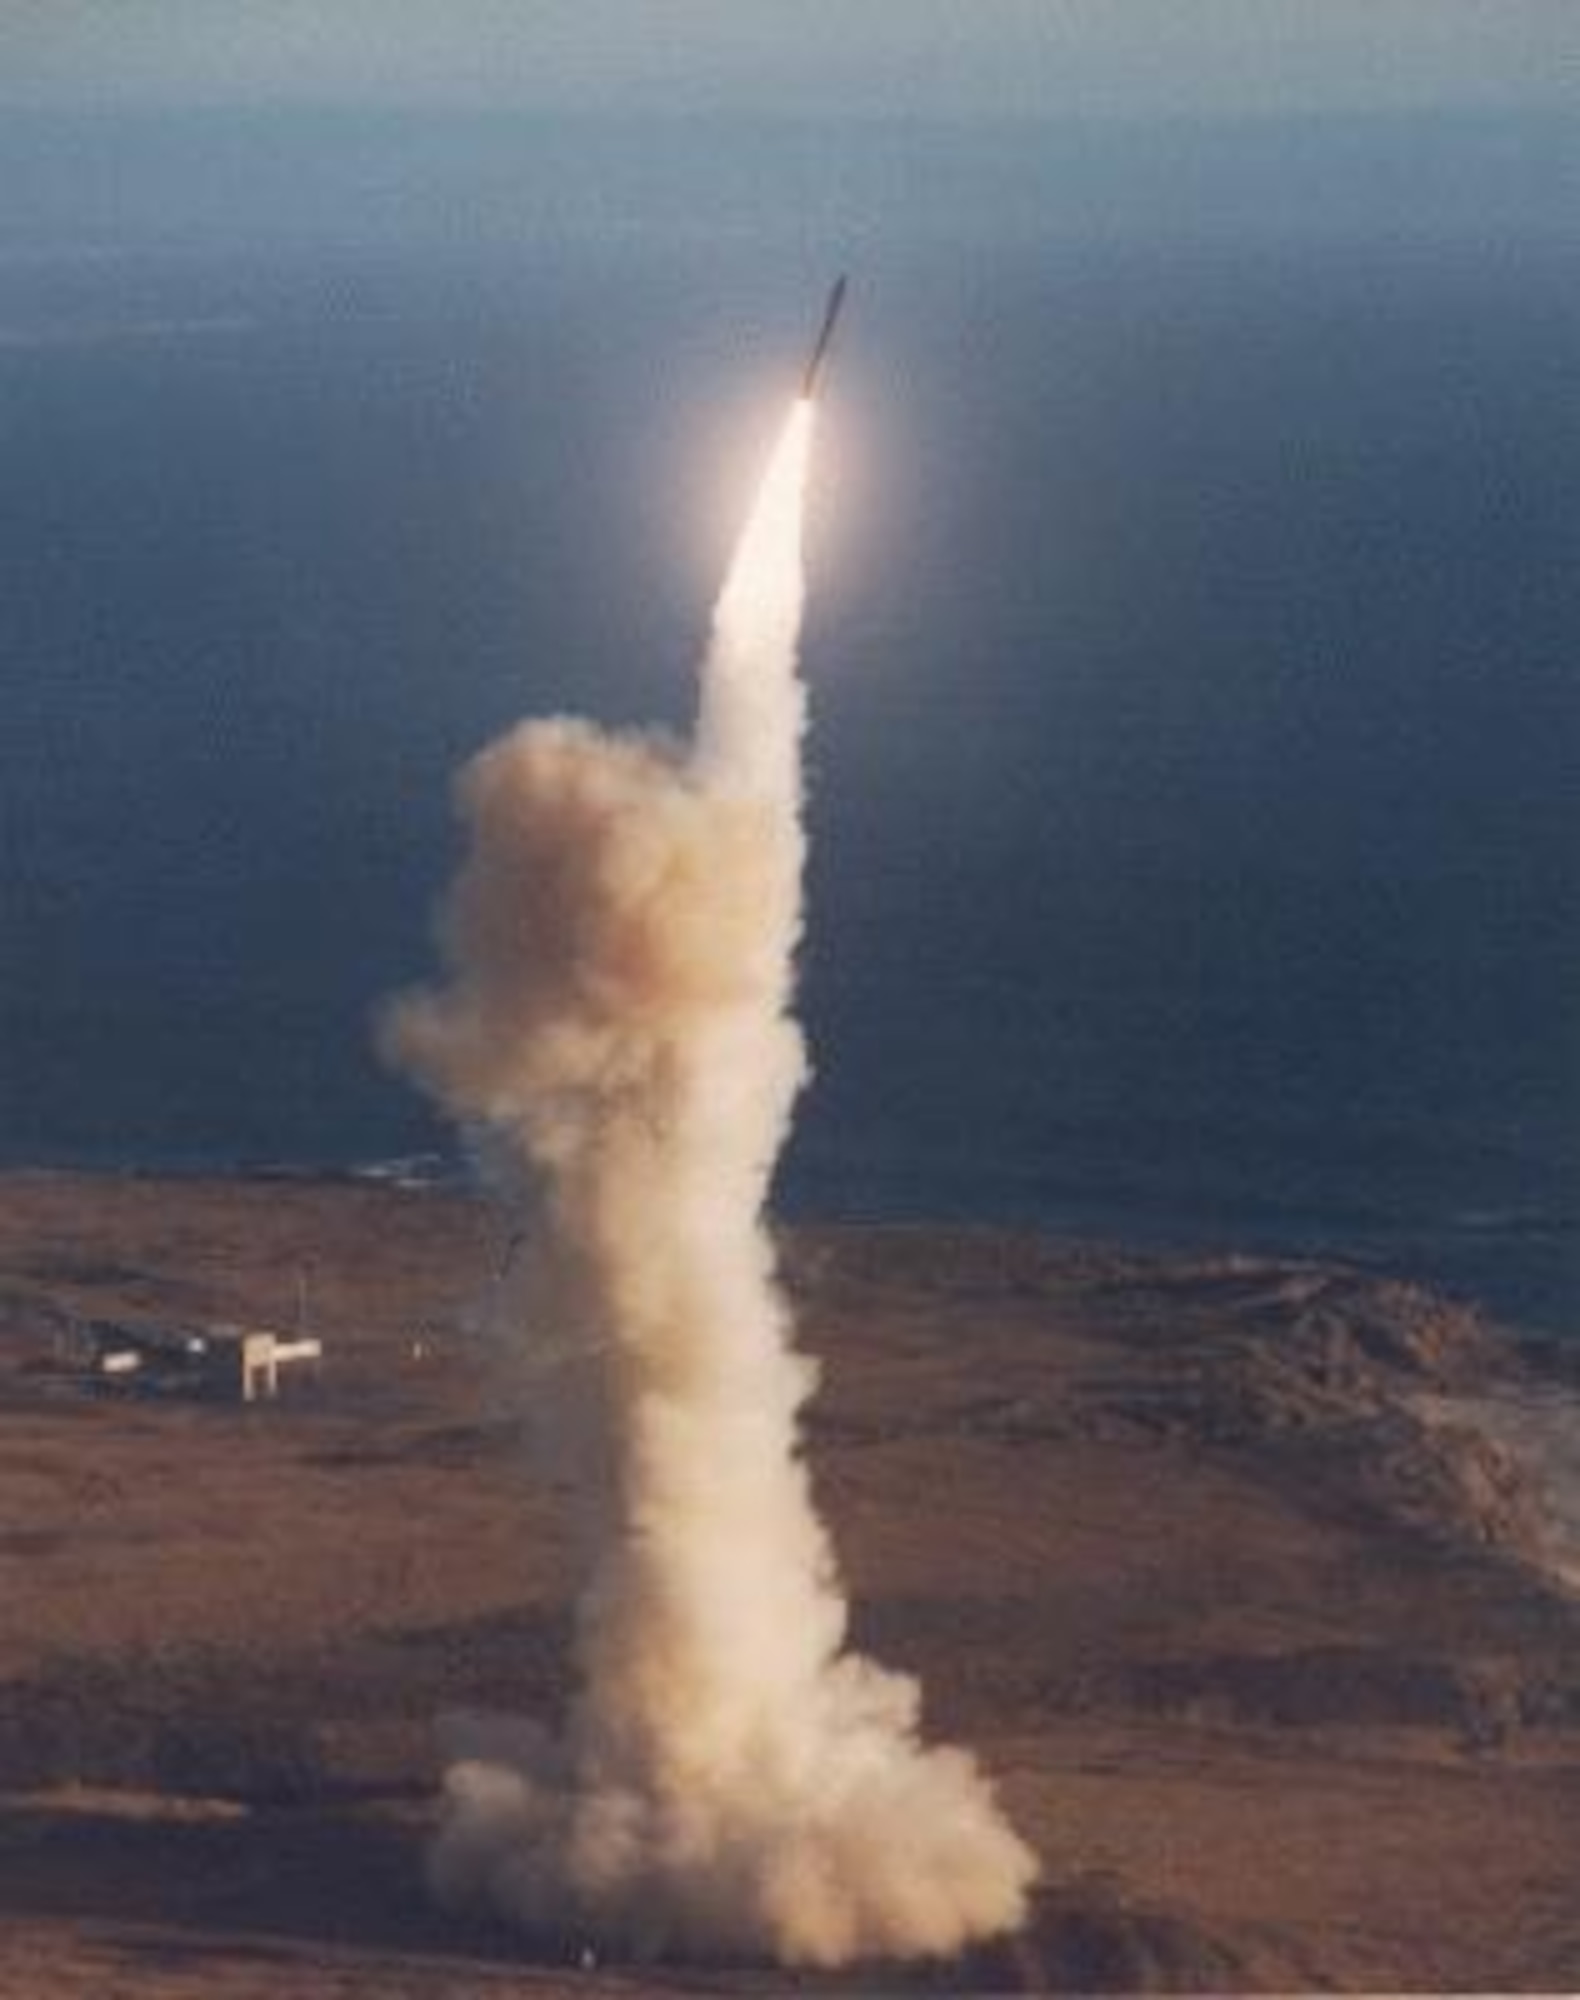 The LGM-30G Minuteman intercontinental ballistic missile (ICBM) is an element of the nation’s strategic deterrent forces. The "L" in LGM is the Department of Defense designation for silo-launched; "G" means surface attack; and "M" stands for guided missile.

